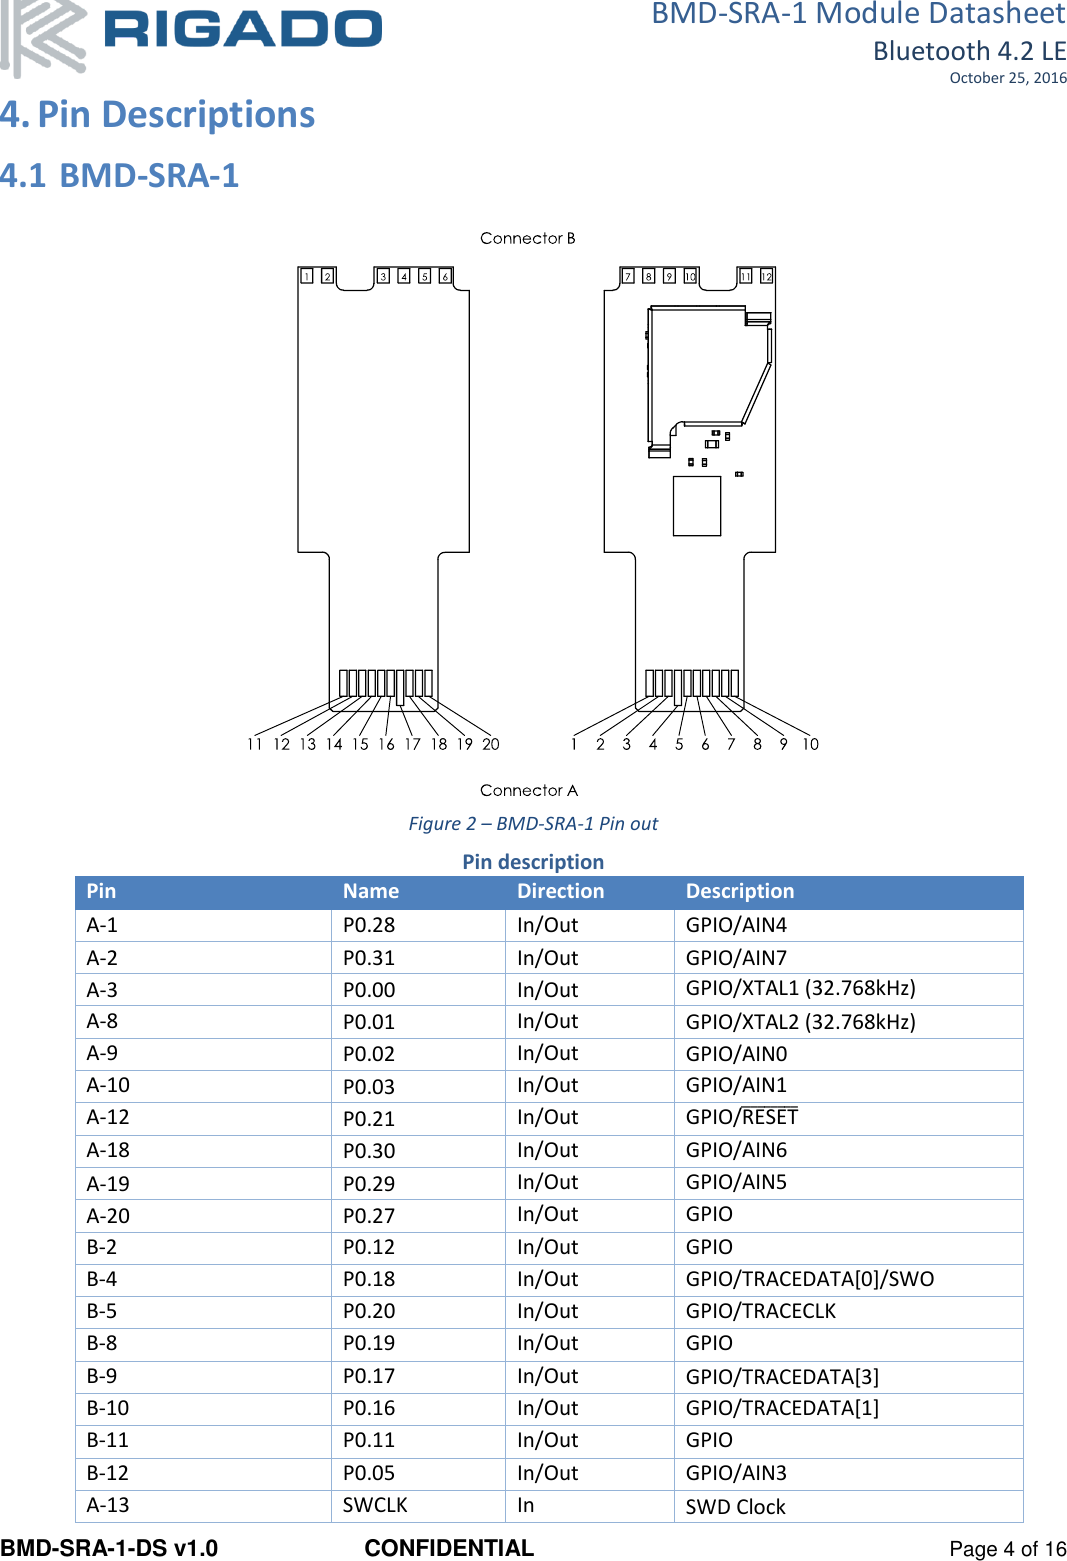 BMD-SRA-1 Module Datasheet Bluetooth 4.2 LE October 25, 2016 BMD-SRA-1-DS v1.0  CONFIDENTIAL  Page 4 of 16 4. Pin Descriptions  4.1 BMD-SRA-1   Figure 2 – BMD-SRA-1 Pin out  Pin description Pin Name Direction Description A-1 P0.28 In/Out GPIO/AIN4 A-2 P0.31 In/Out GPIO/AIN7 A-3 P0.00 In/Out GPIO/XTAL1 (32.768kHz) A-8 P0.01 In/Out GPIO/XTAL2 (32.768kHz) A-9 P0.02 In/Out GPIO/AIN0 A-10 P0.03 In/Out GPIO/AIN1 A-12 P0.21 In/Out GPIO/RESET̅̅̅̅̅̅̅̅ A-18 P0.30 In/Out GPIO/AIN6 A-19 P0.29 In/Out GPIO/AIN5 A-20 P0.27 In/Out GPIO B-2 P0.12 In/Out GPIO B-4 P0.18 In/Out GPIO/TRACEDATA[0]/SWO B-5 P0.20 In/Out GPIO/TRACECLK B-8 P0.19 In/Out GPIO B-9 P0.17 In/Out GPIO/TRACEDATA[3] B-10 P0.16 In/Out GPIO/TRACEDATA[1] B-11 P0.11 In/Out GPIO B-12 P0.05 In/Out GPIO/AIN3 A-13 SWCLK In SWD Clock 